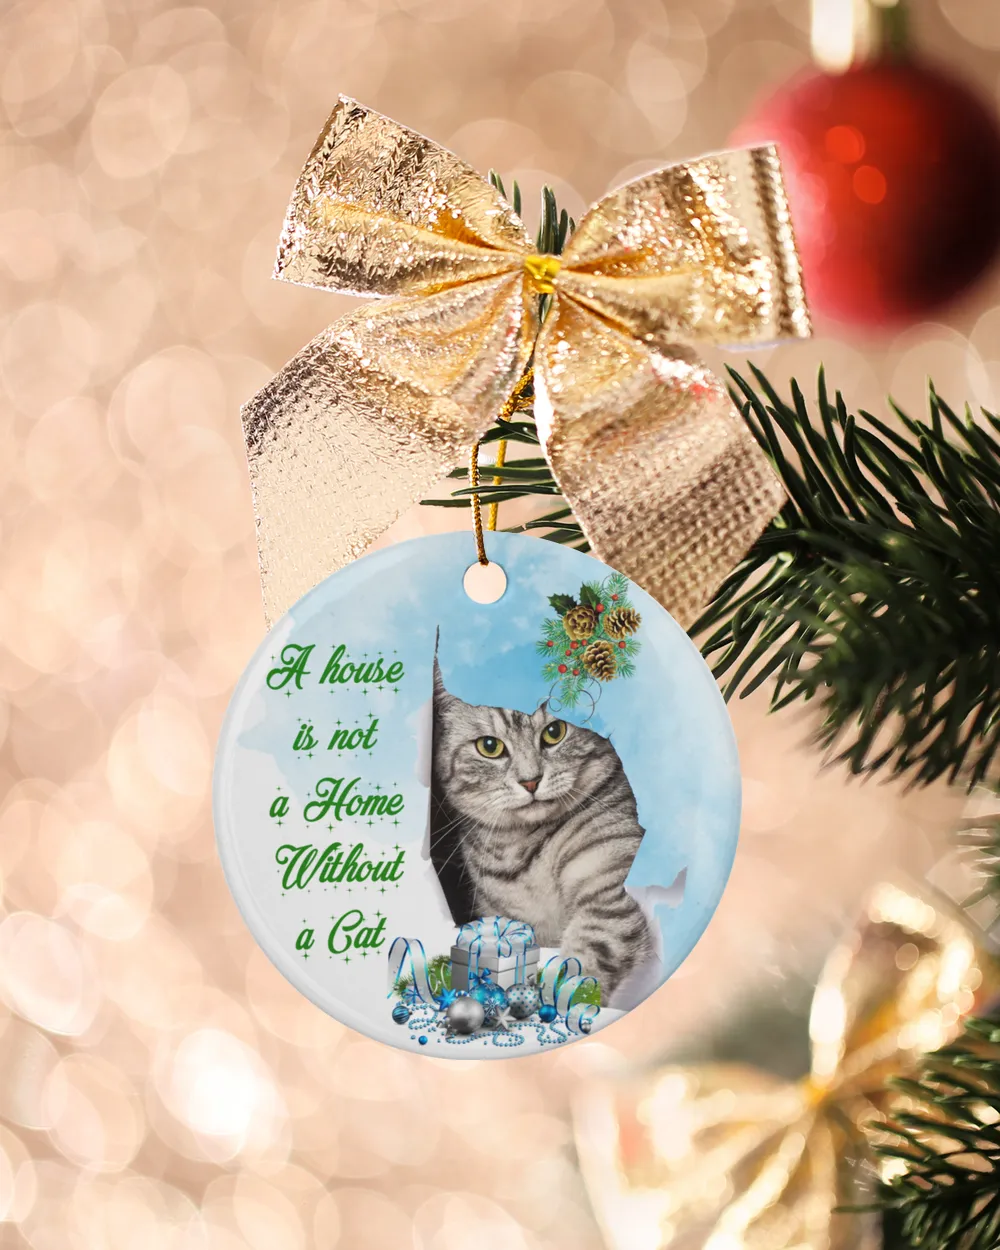 Christmas Ornaments - A house is not a Home without a Cat